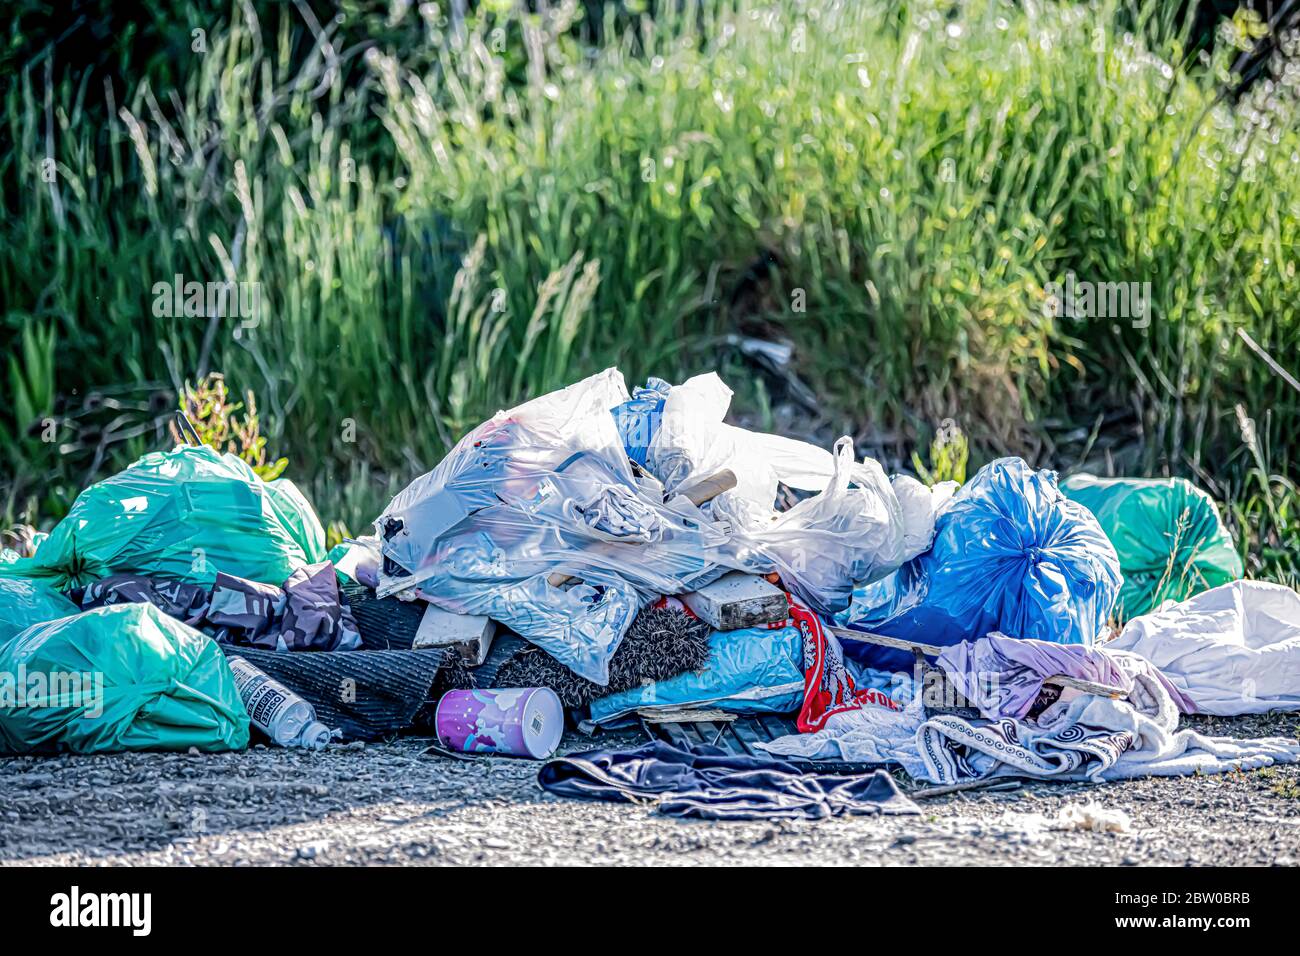 Illegal Fly tipping rubbish dumped in country side May 2020 Stock Photo